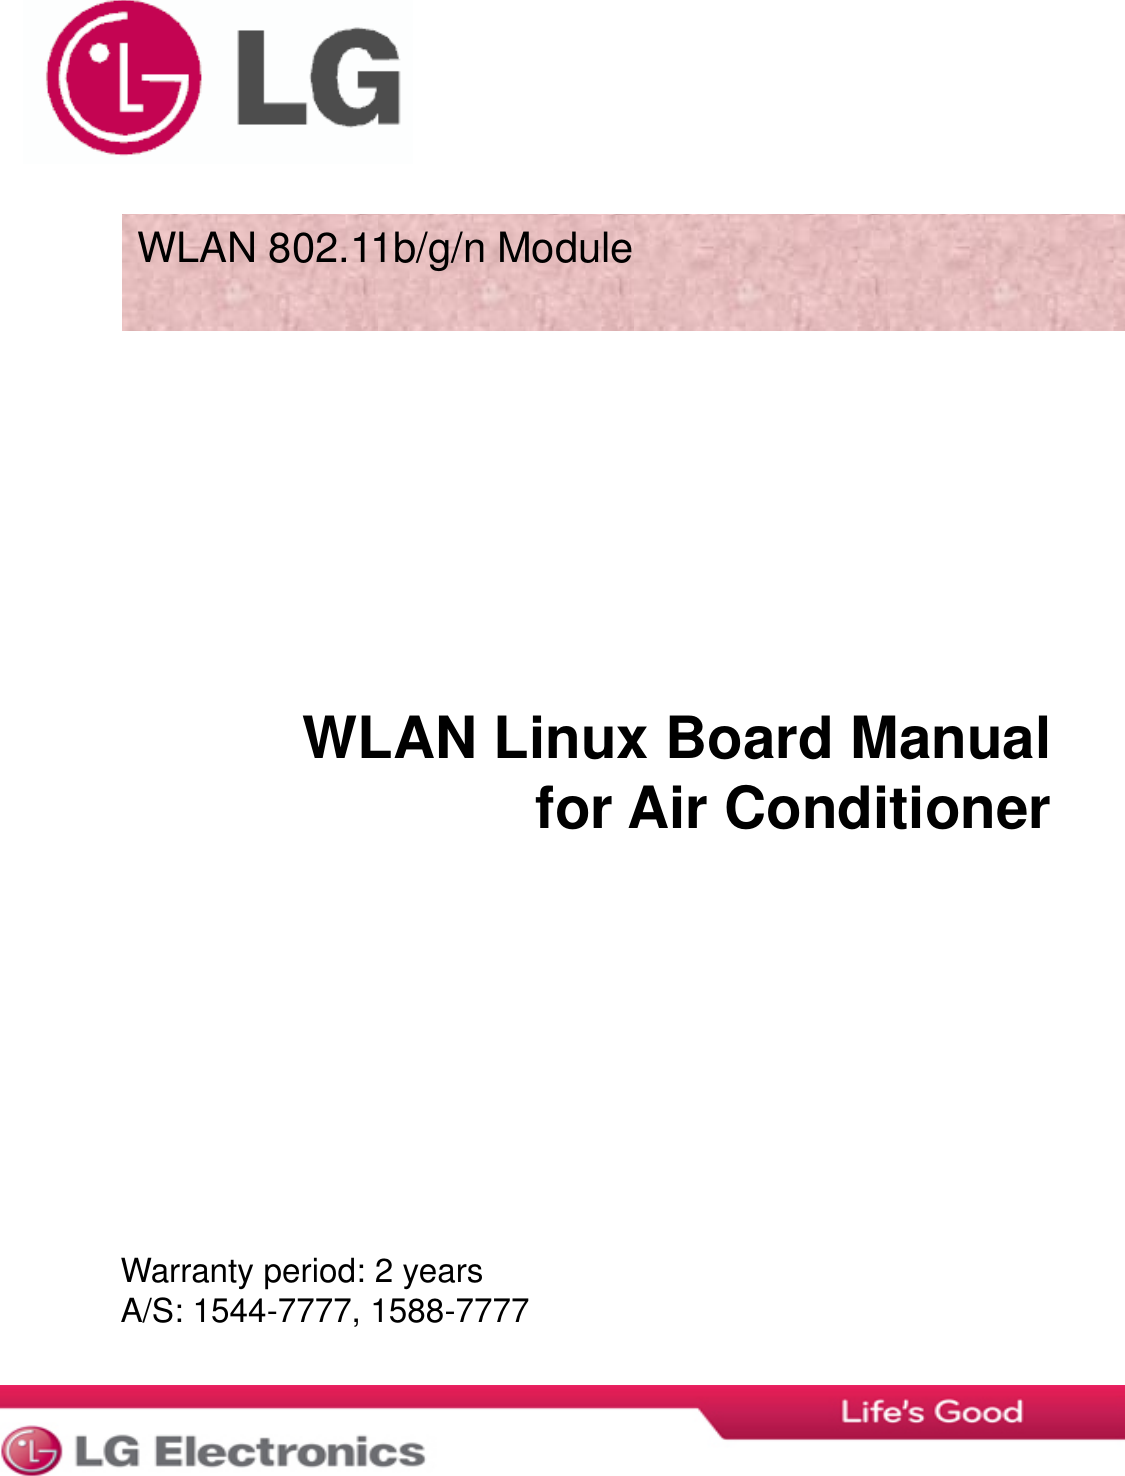 WLAN 802.11b/g/n Module  WLAN Linux Board Manual for Air Conditioner  Warranty period: 2 years A/S: 1544-7777, 1588-7777 